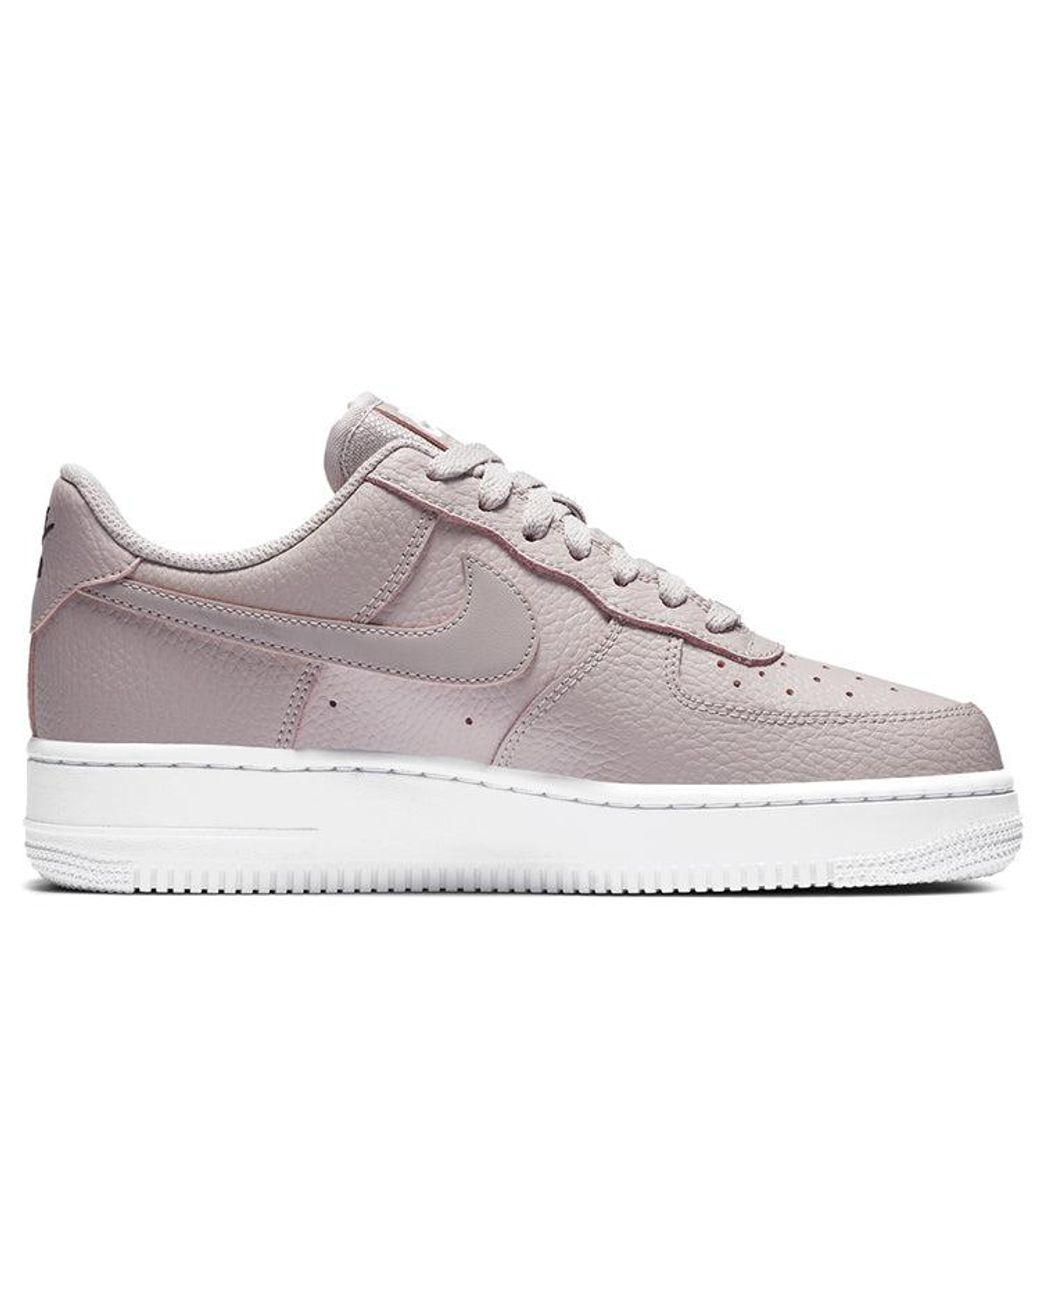 Nike Air Force 1 Low Double Swoosh Light Pink in White | Lyst